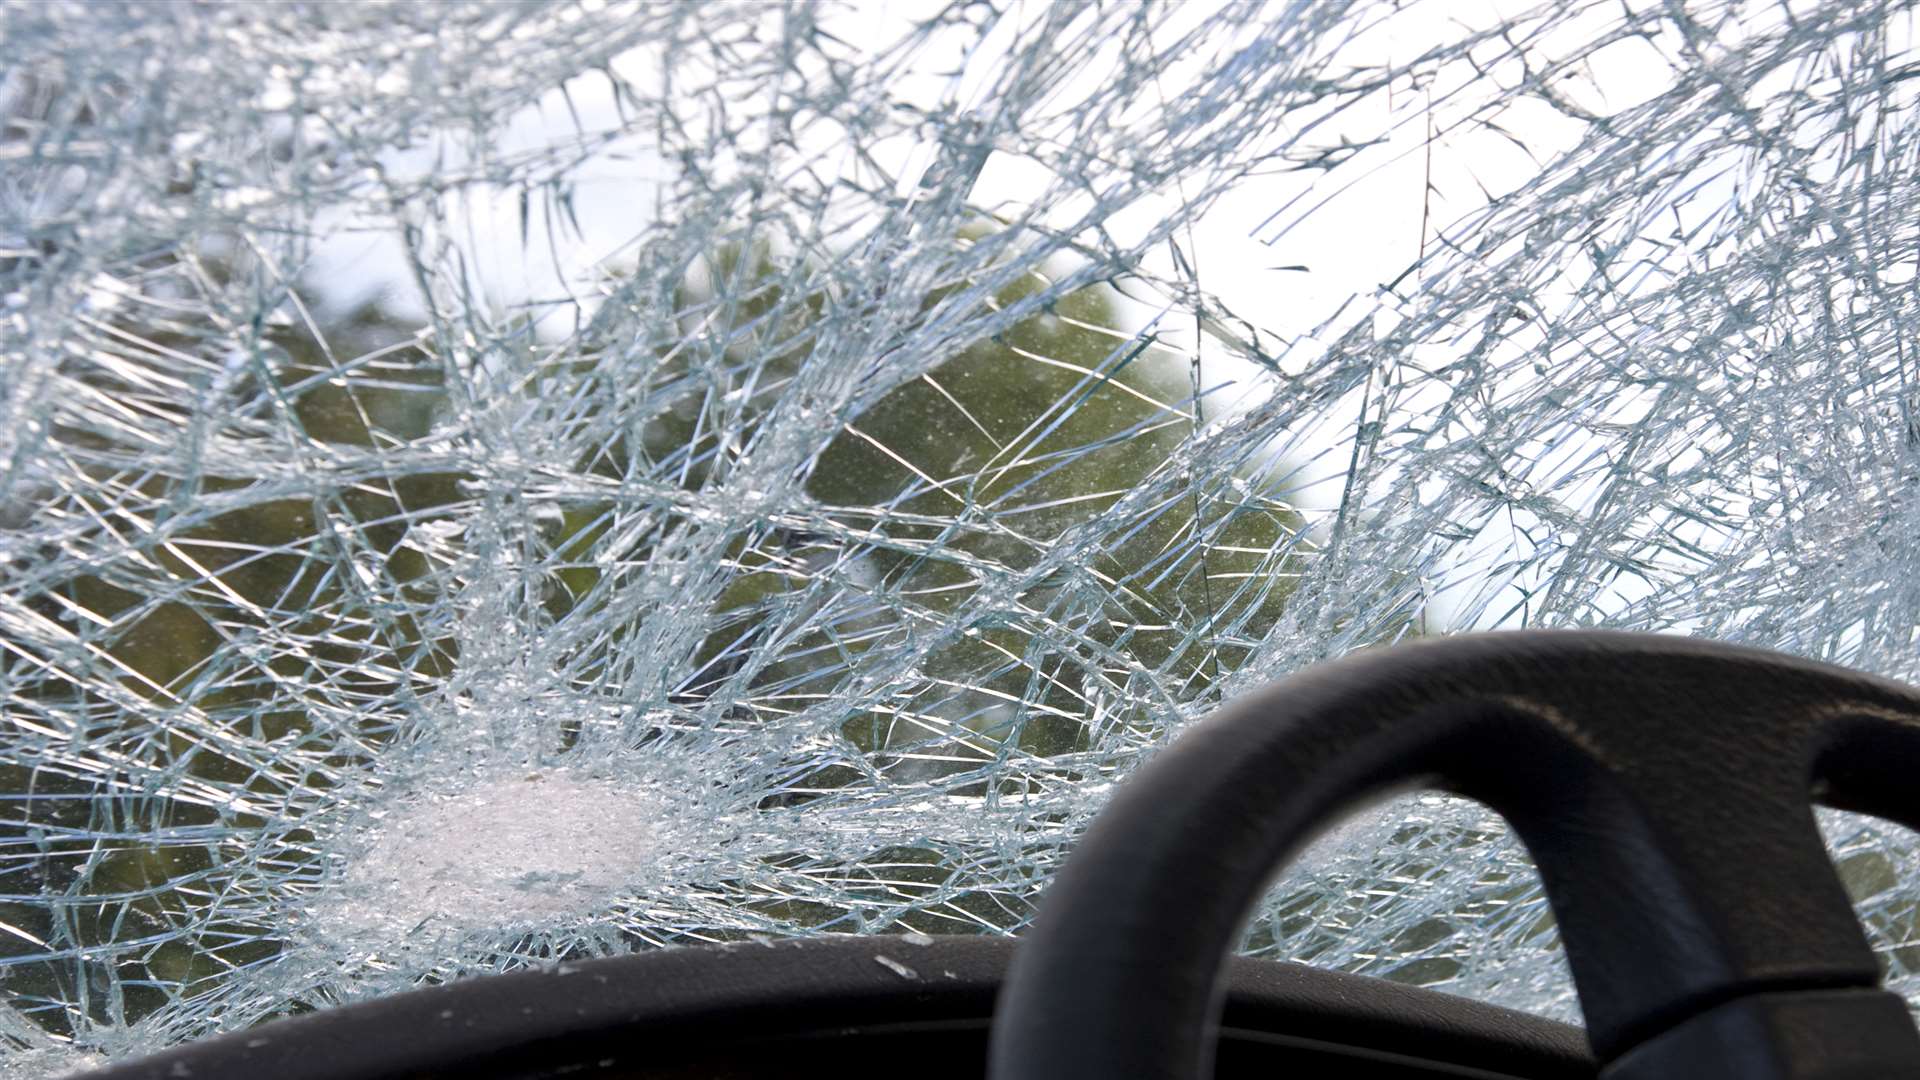 The car's windscreen was smashed. Stock picture: Thinkstock